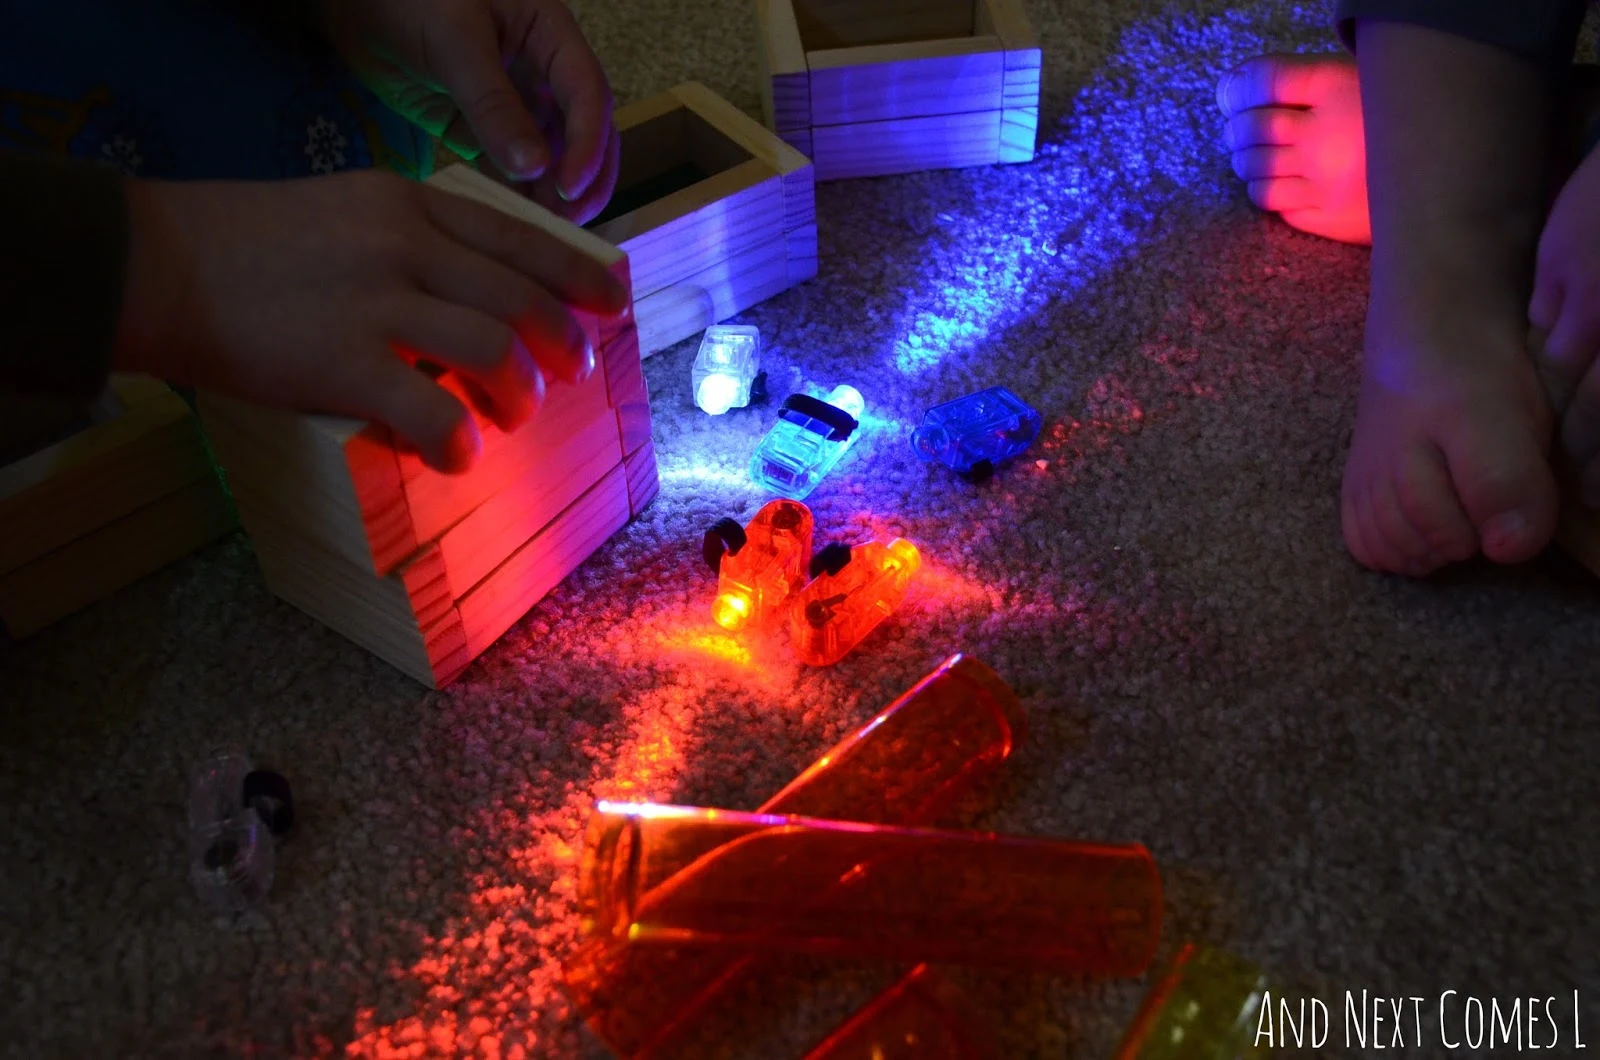 Light play for kids using finger lights and translucent objects from And Next Comes L